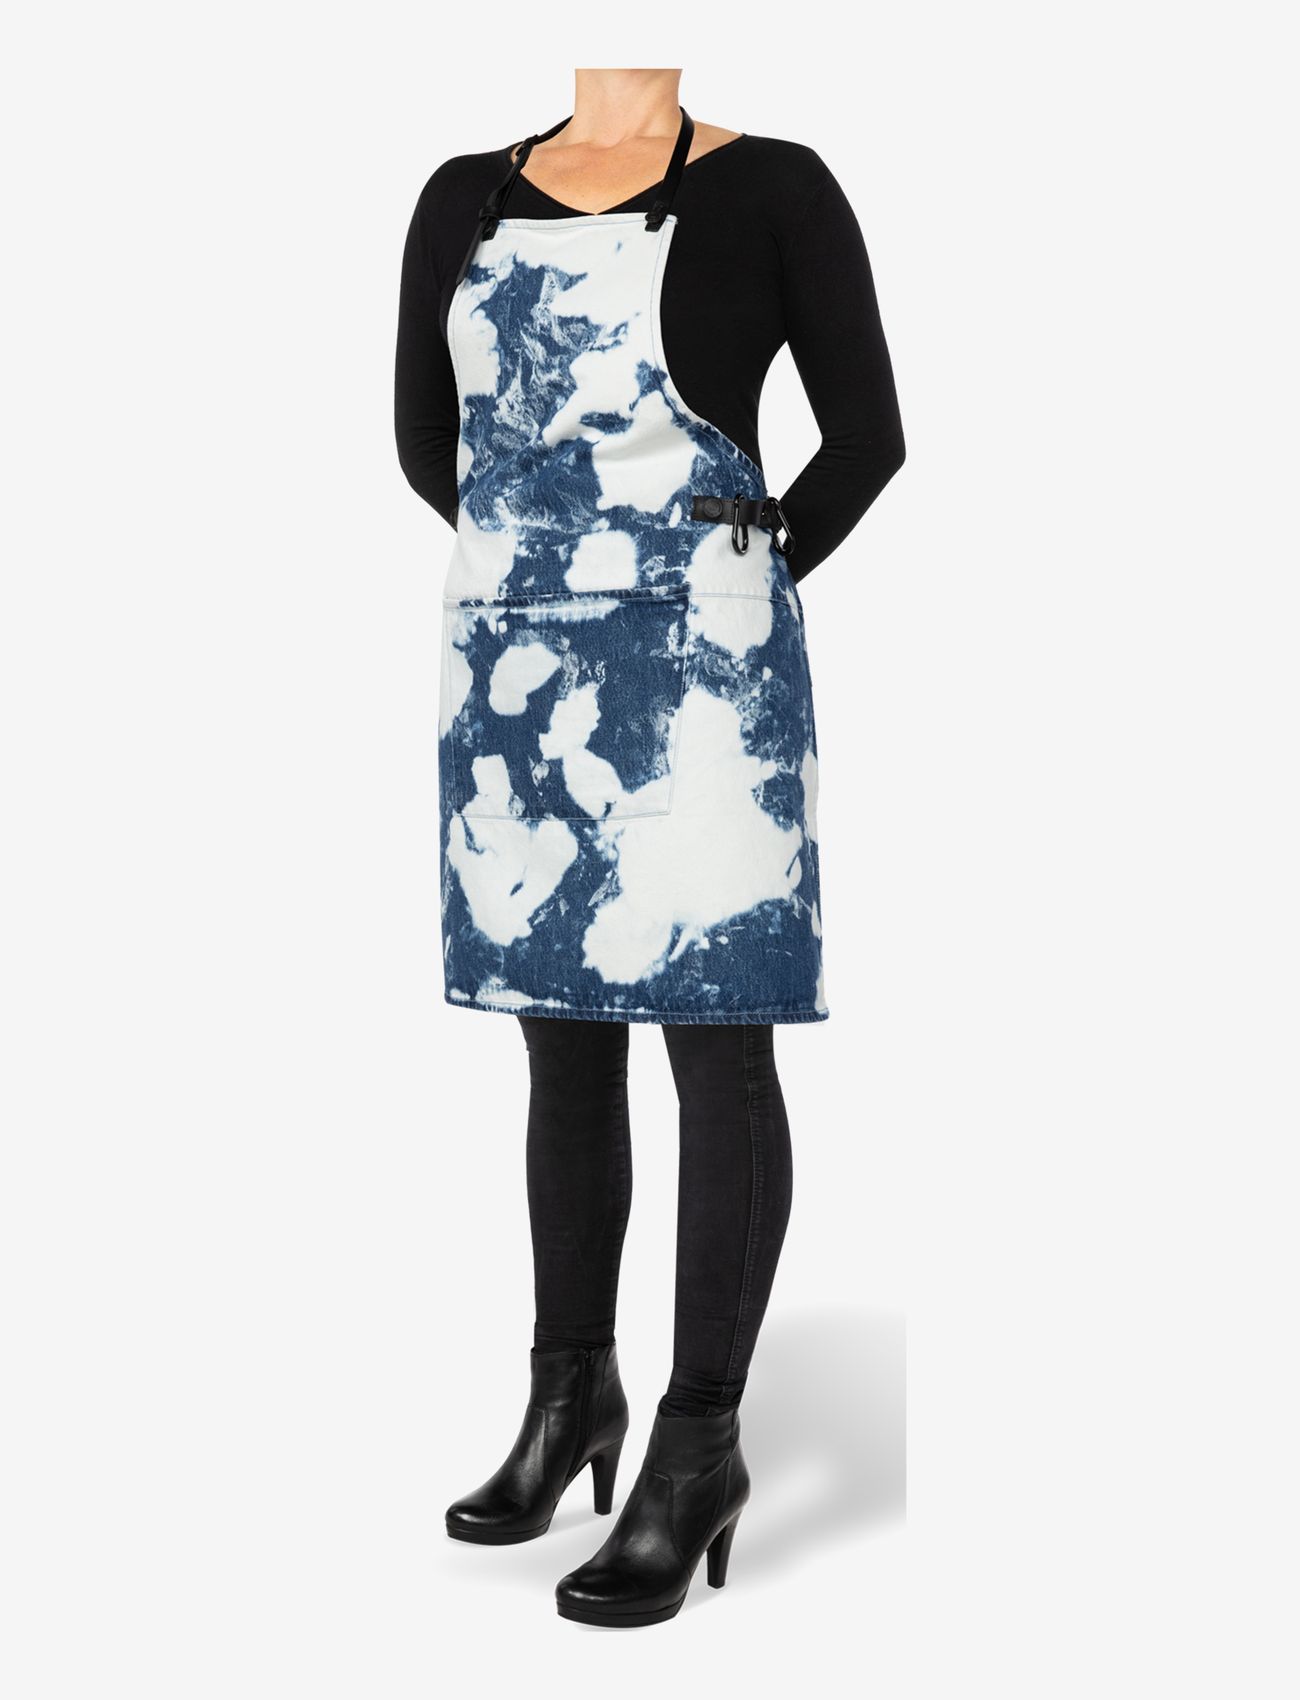 Dutchdeluxes - BBQ Style Apron - aprons - blue stained - 1